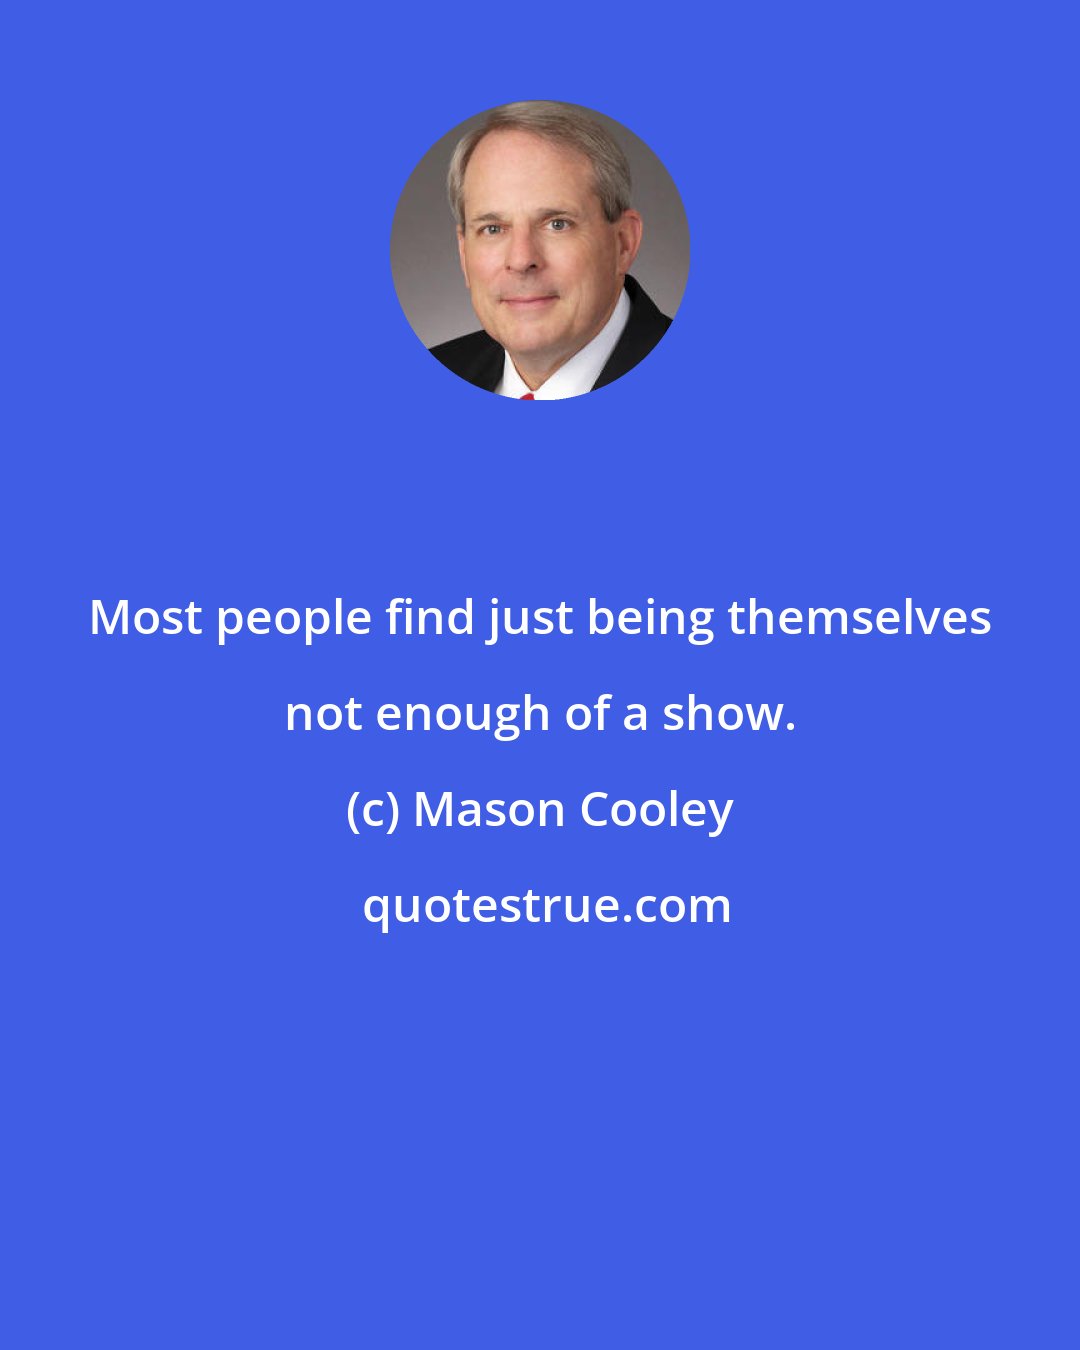 Mason Cooley: Most people find just being themselves not enough of a show.